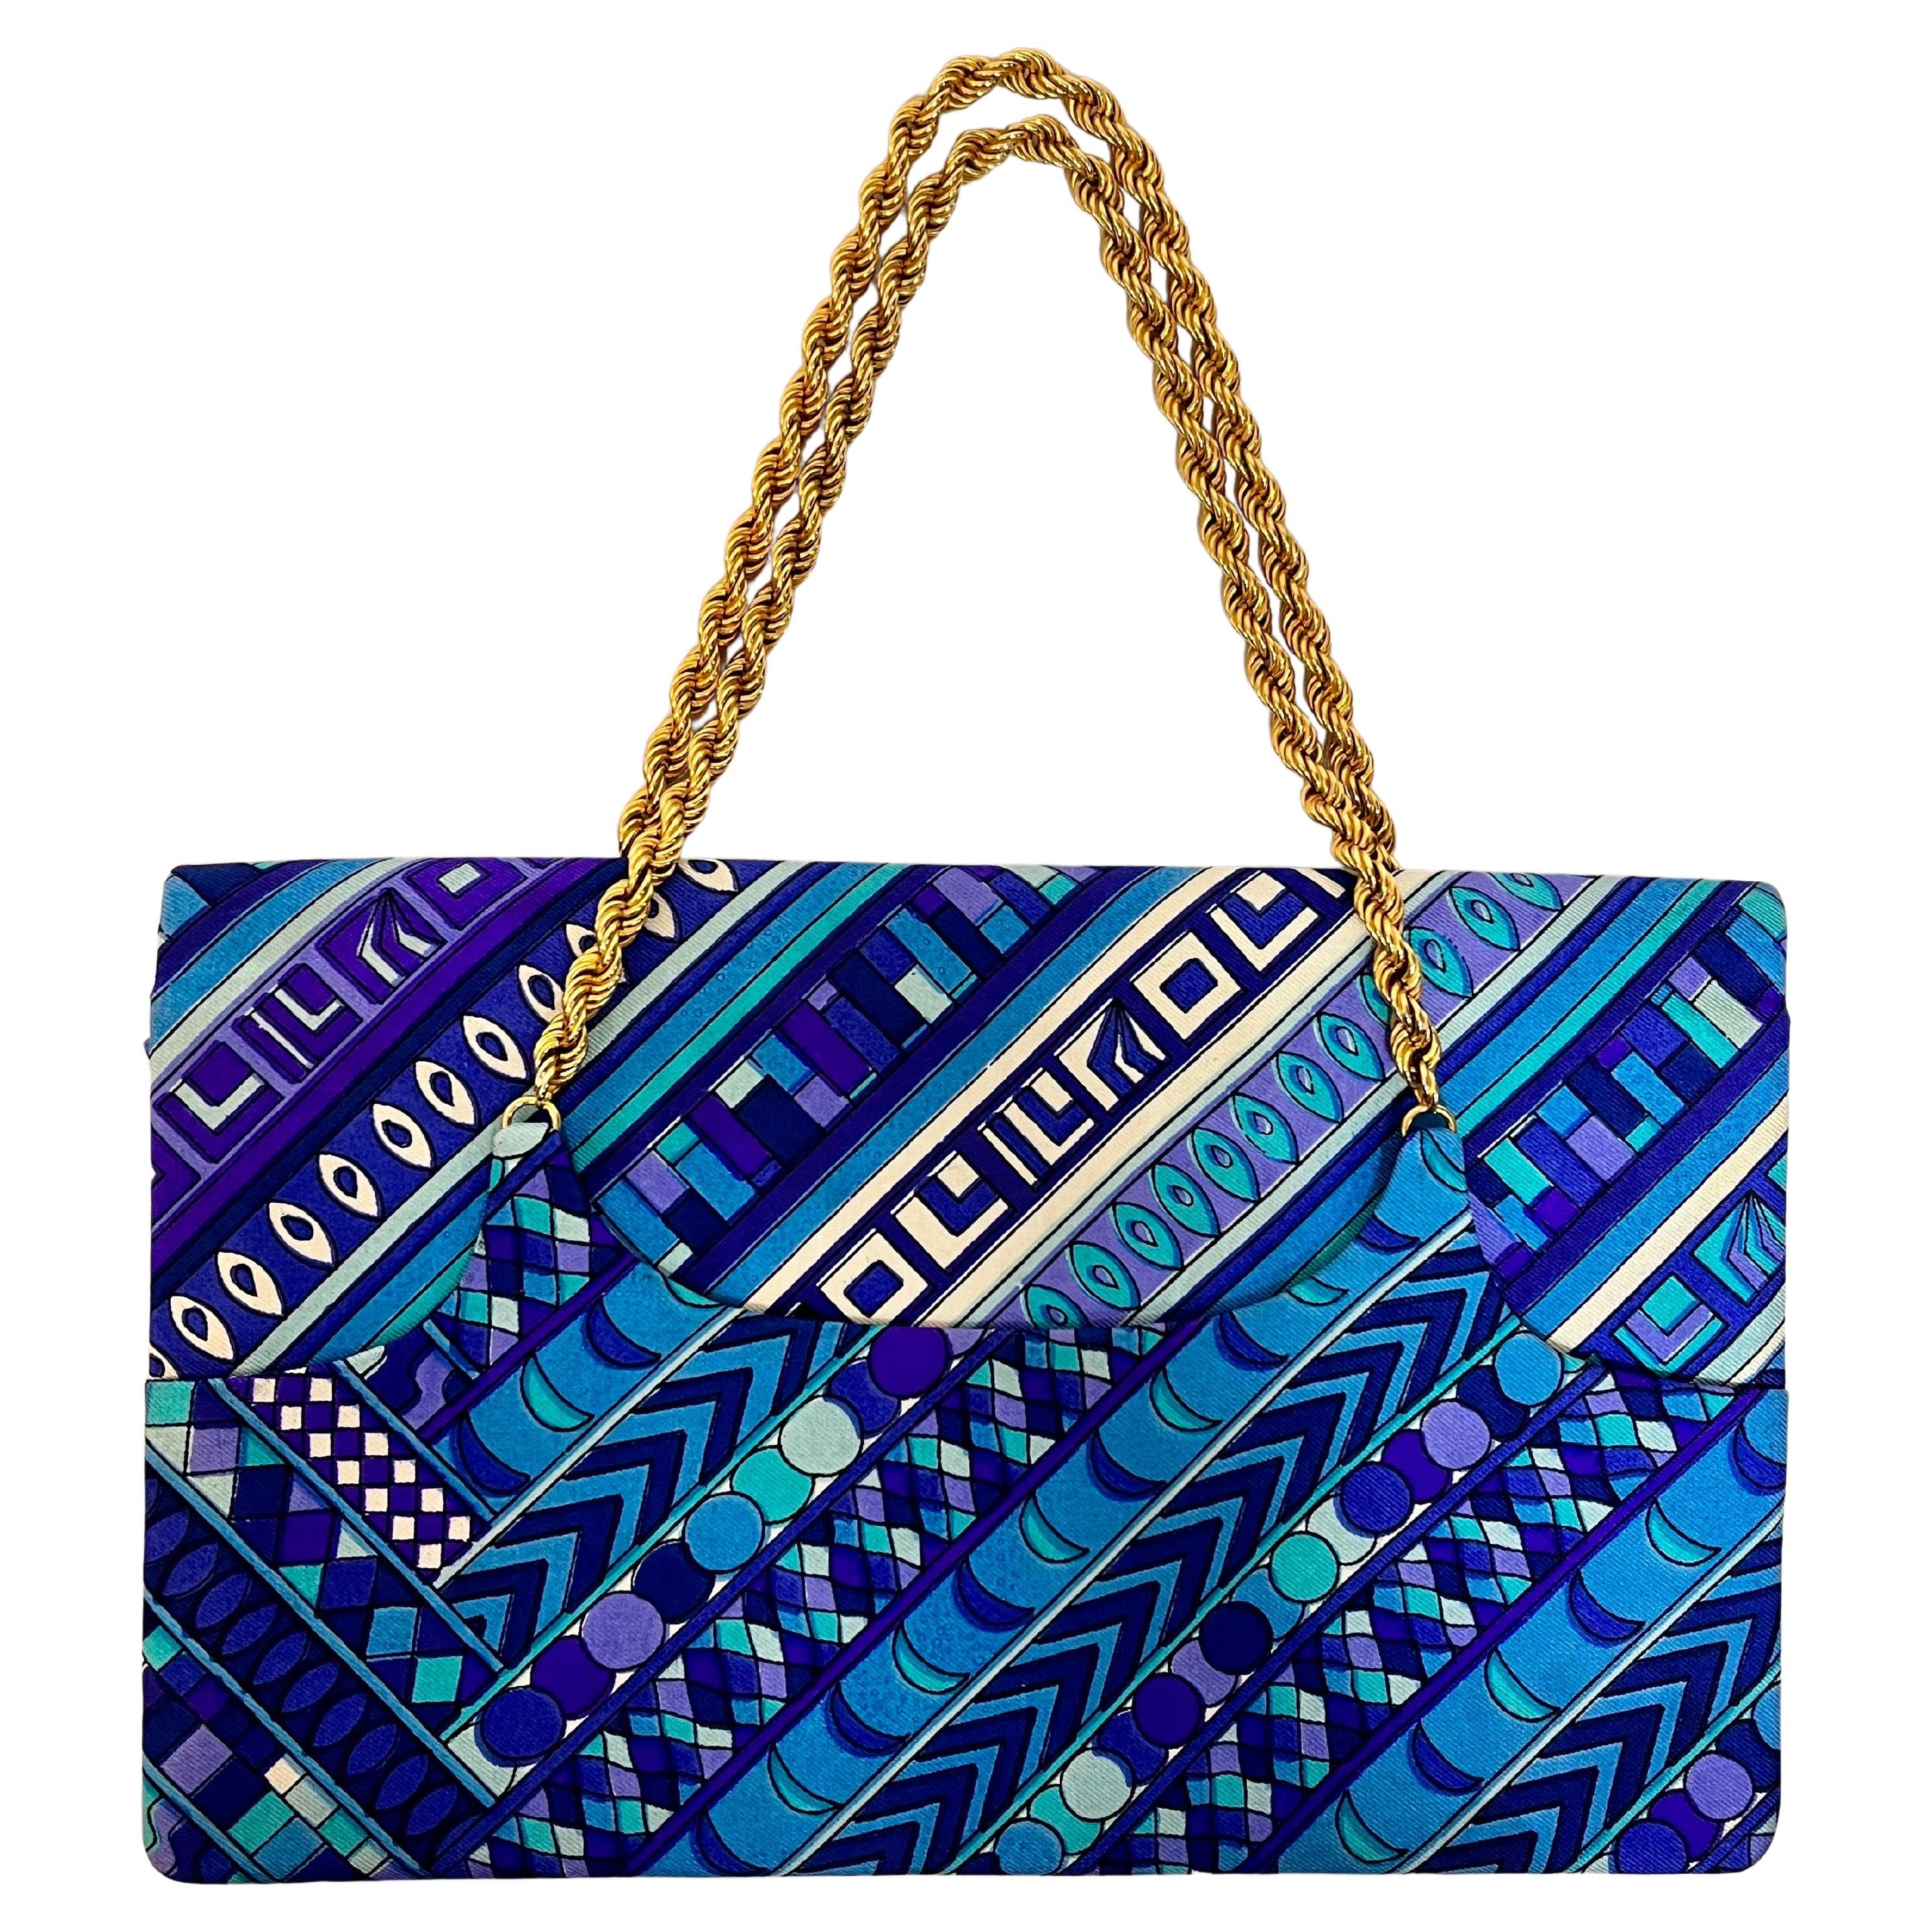 Emilio Pucci 1960s Top Handle Chain Signed Vibrant Print Clutch Fold over Bag